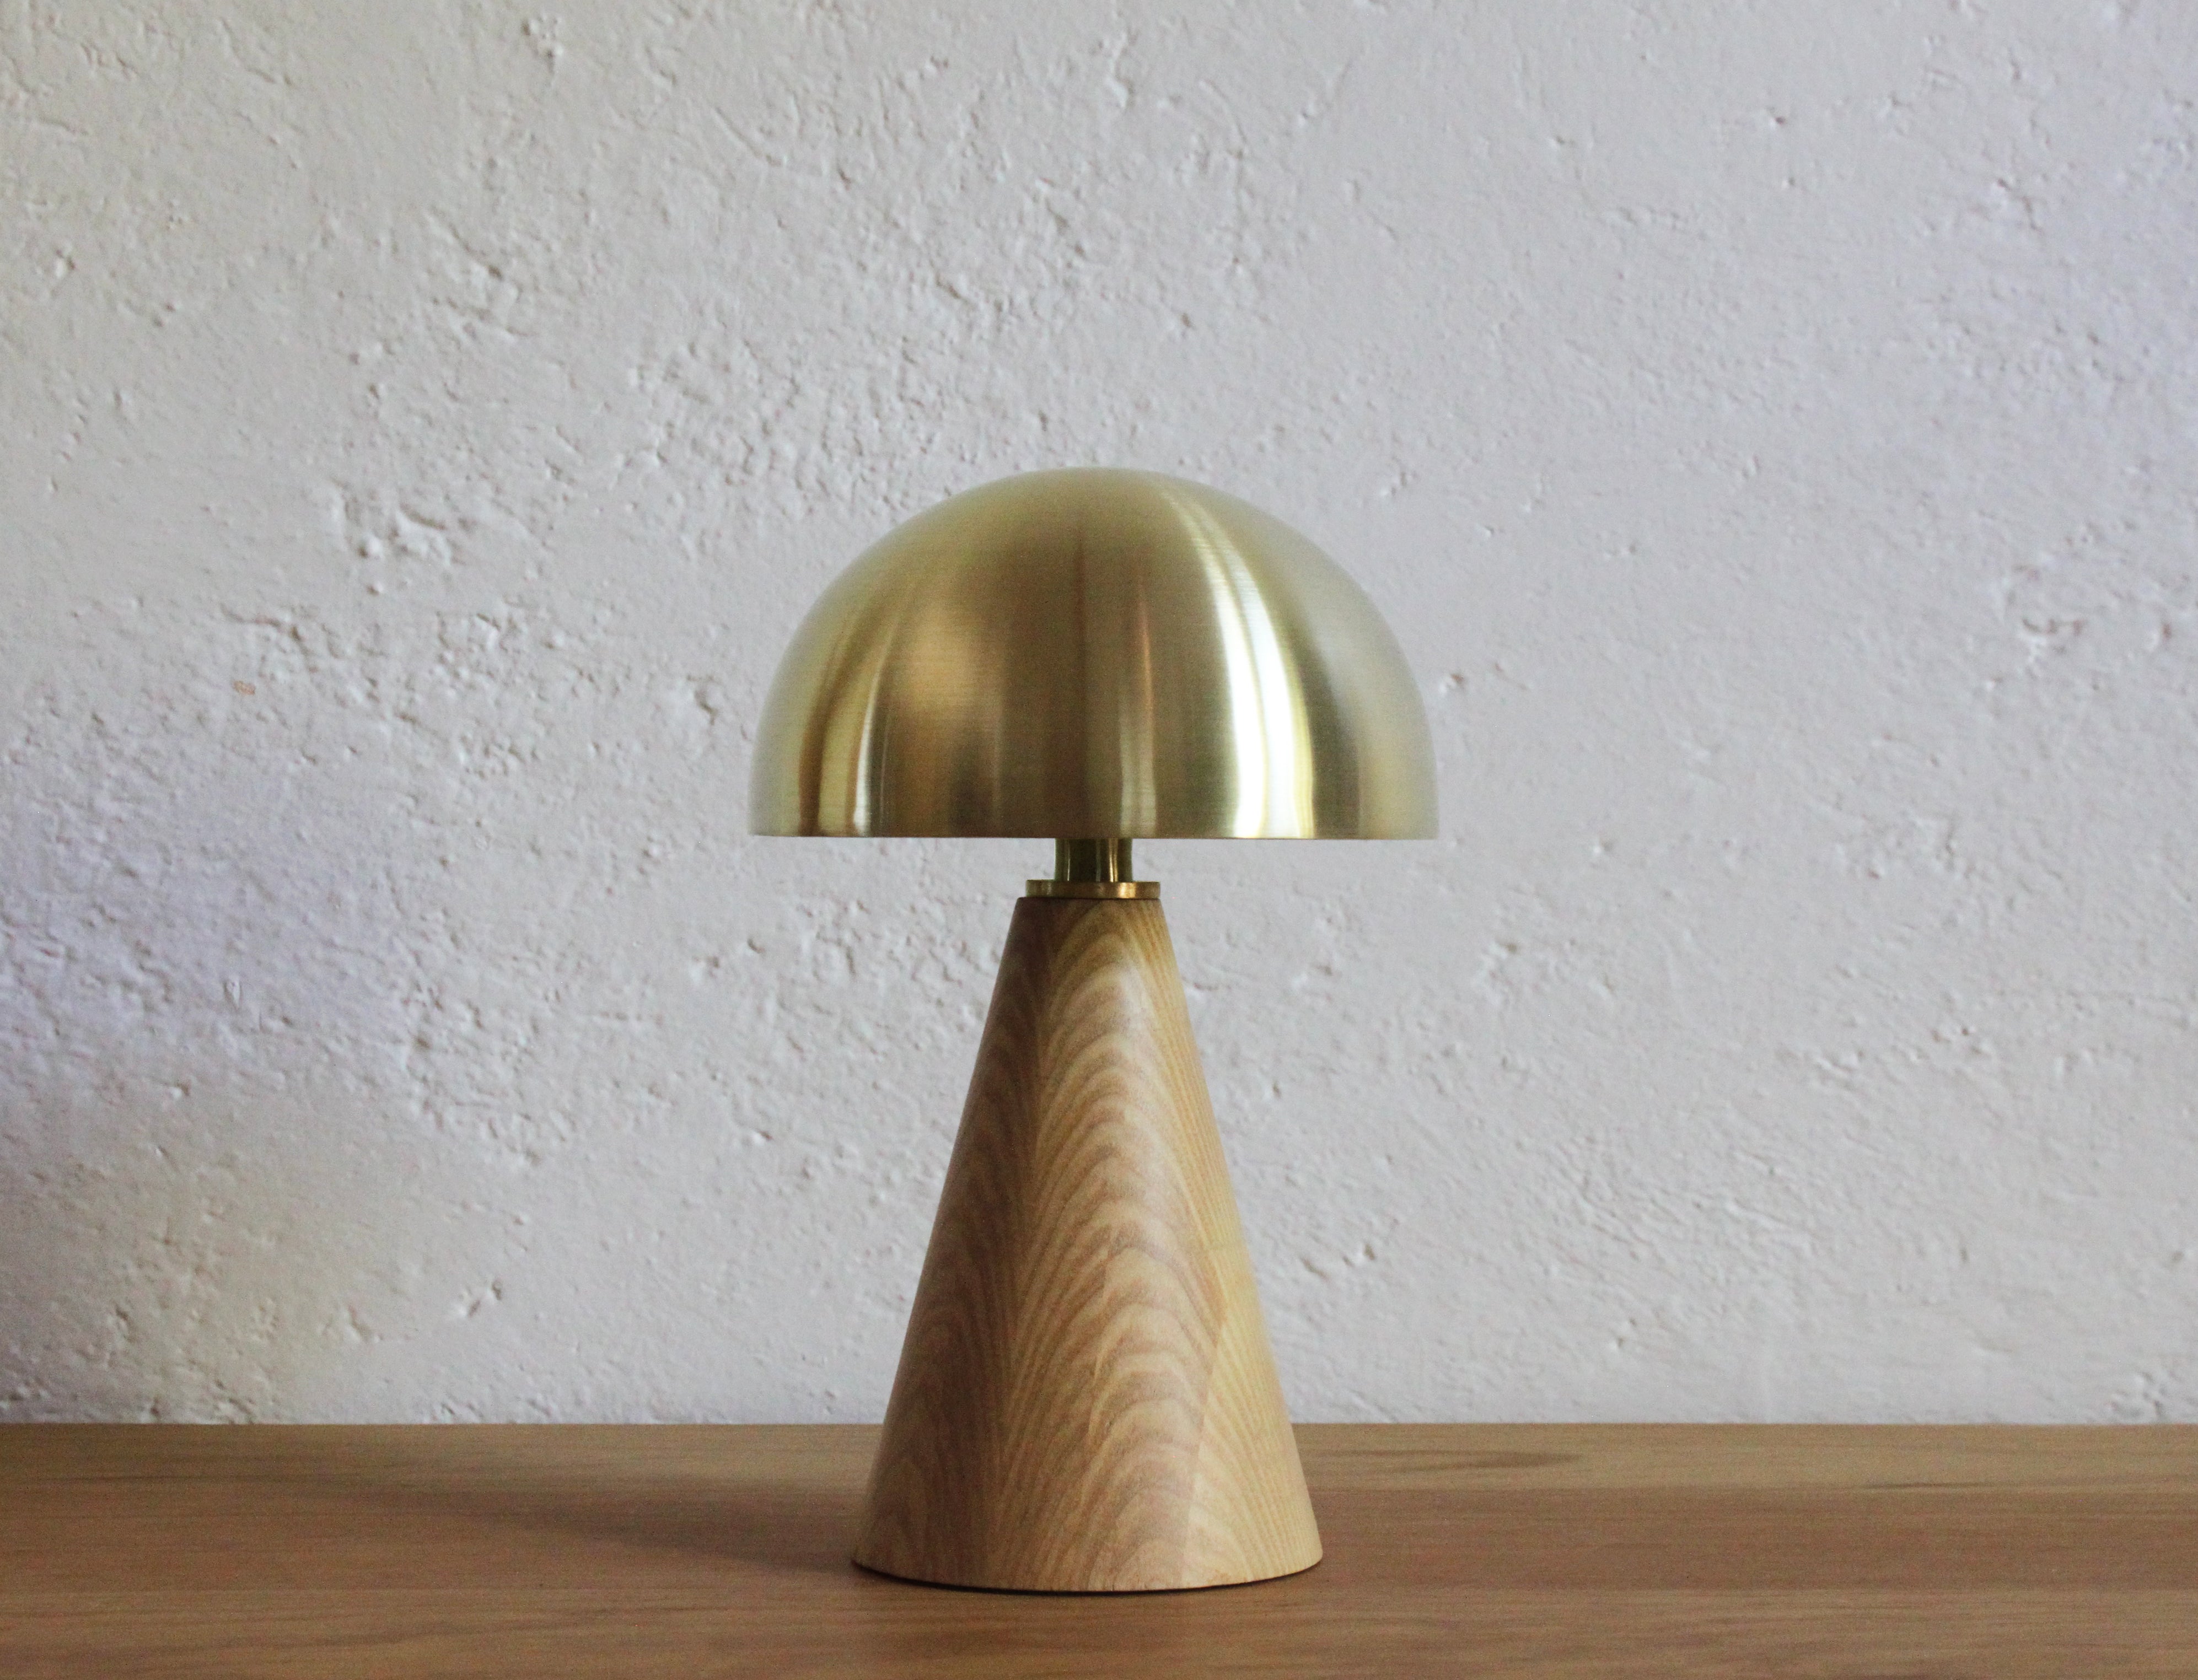 Paraguas Lamp with brass dome. Available through Tuleste Factory, a gallery for fine art and collectible design in New York City.